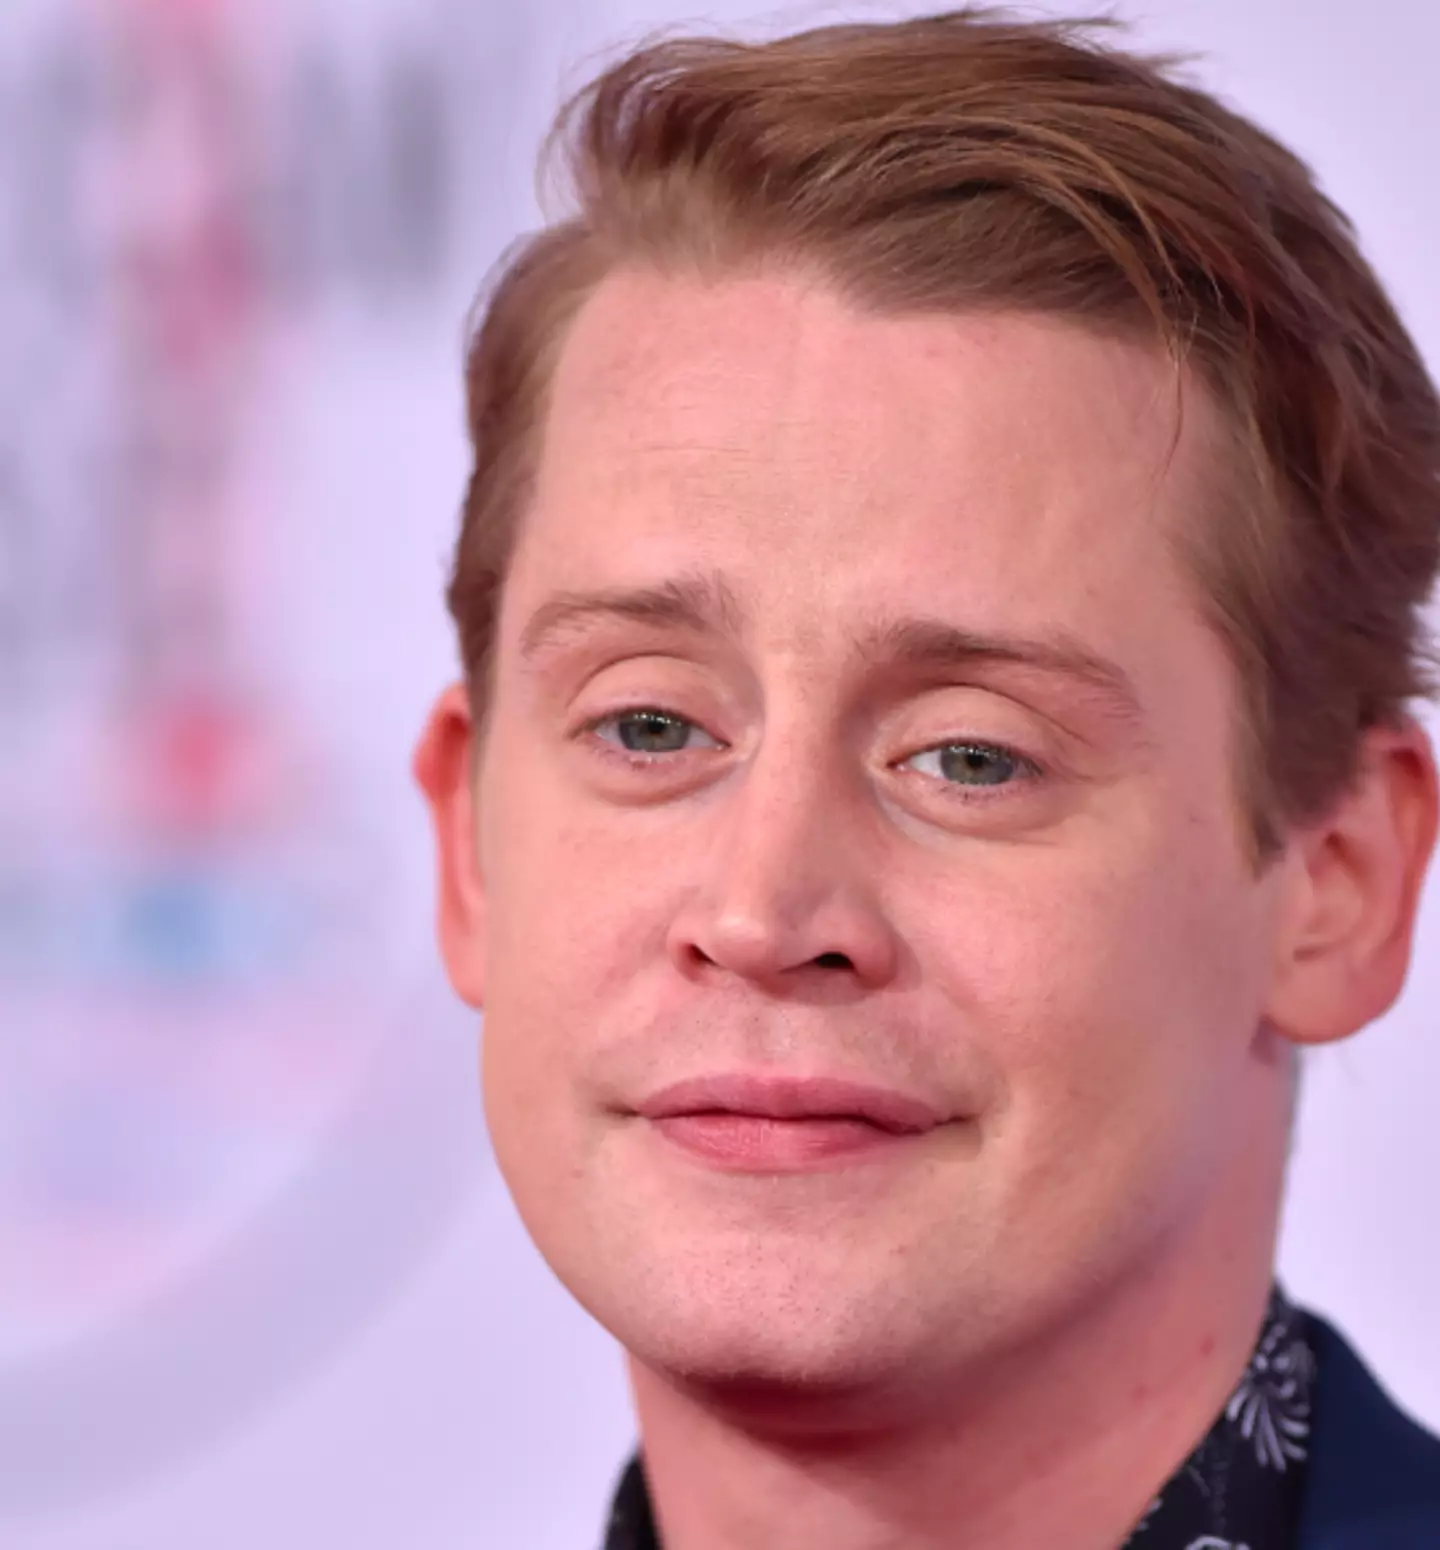 Culkin insisted that Jackson never abused him.